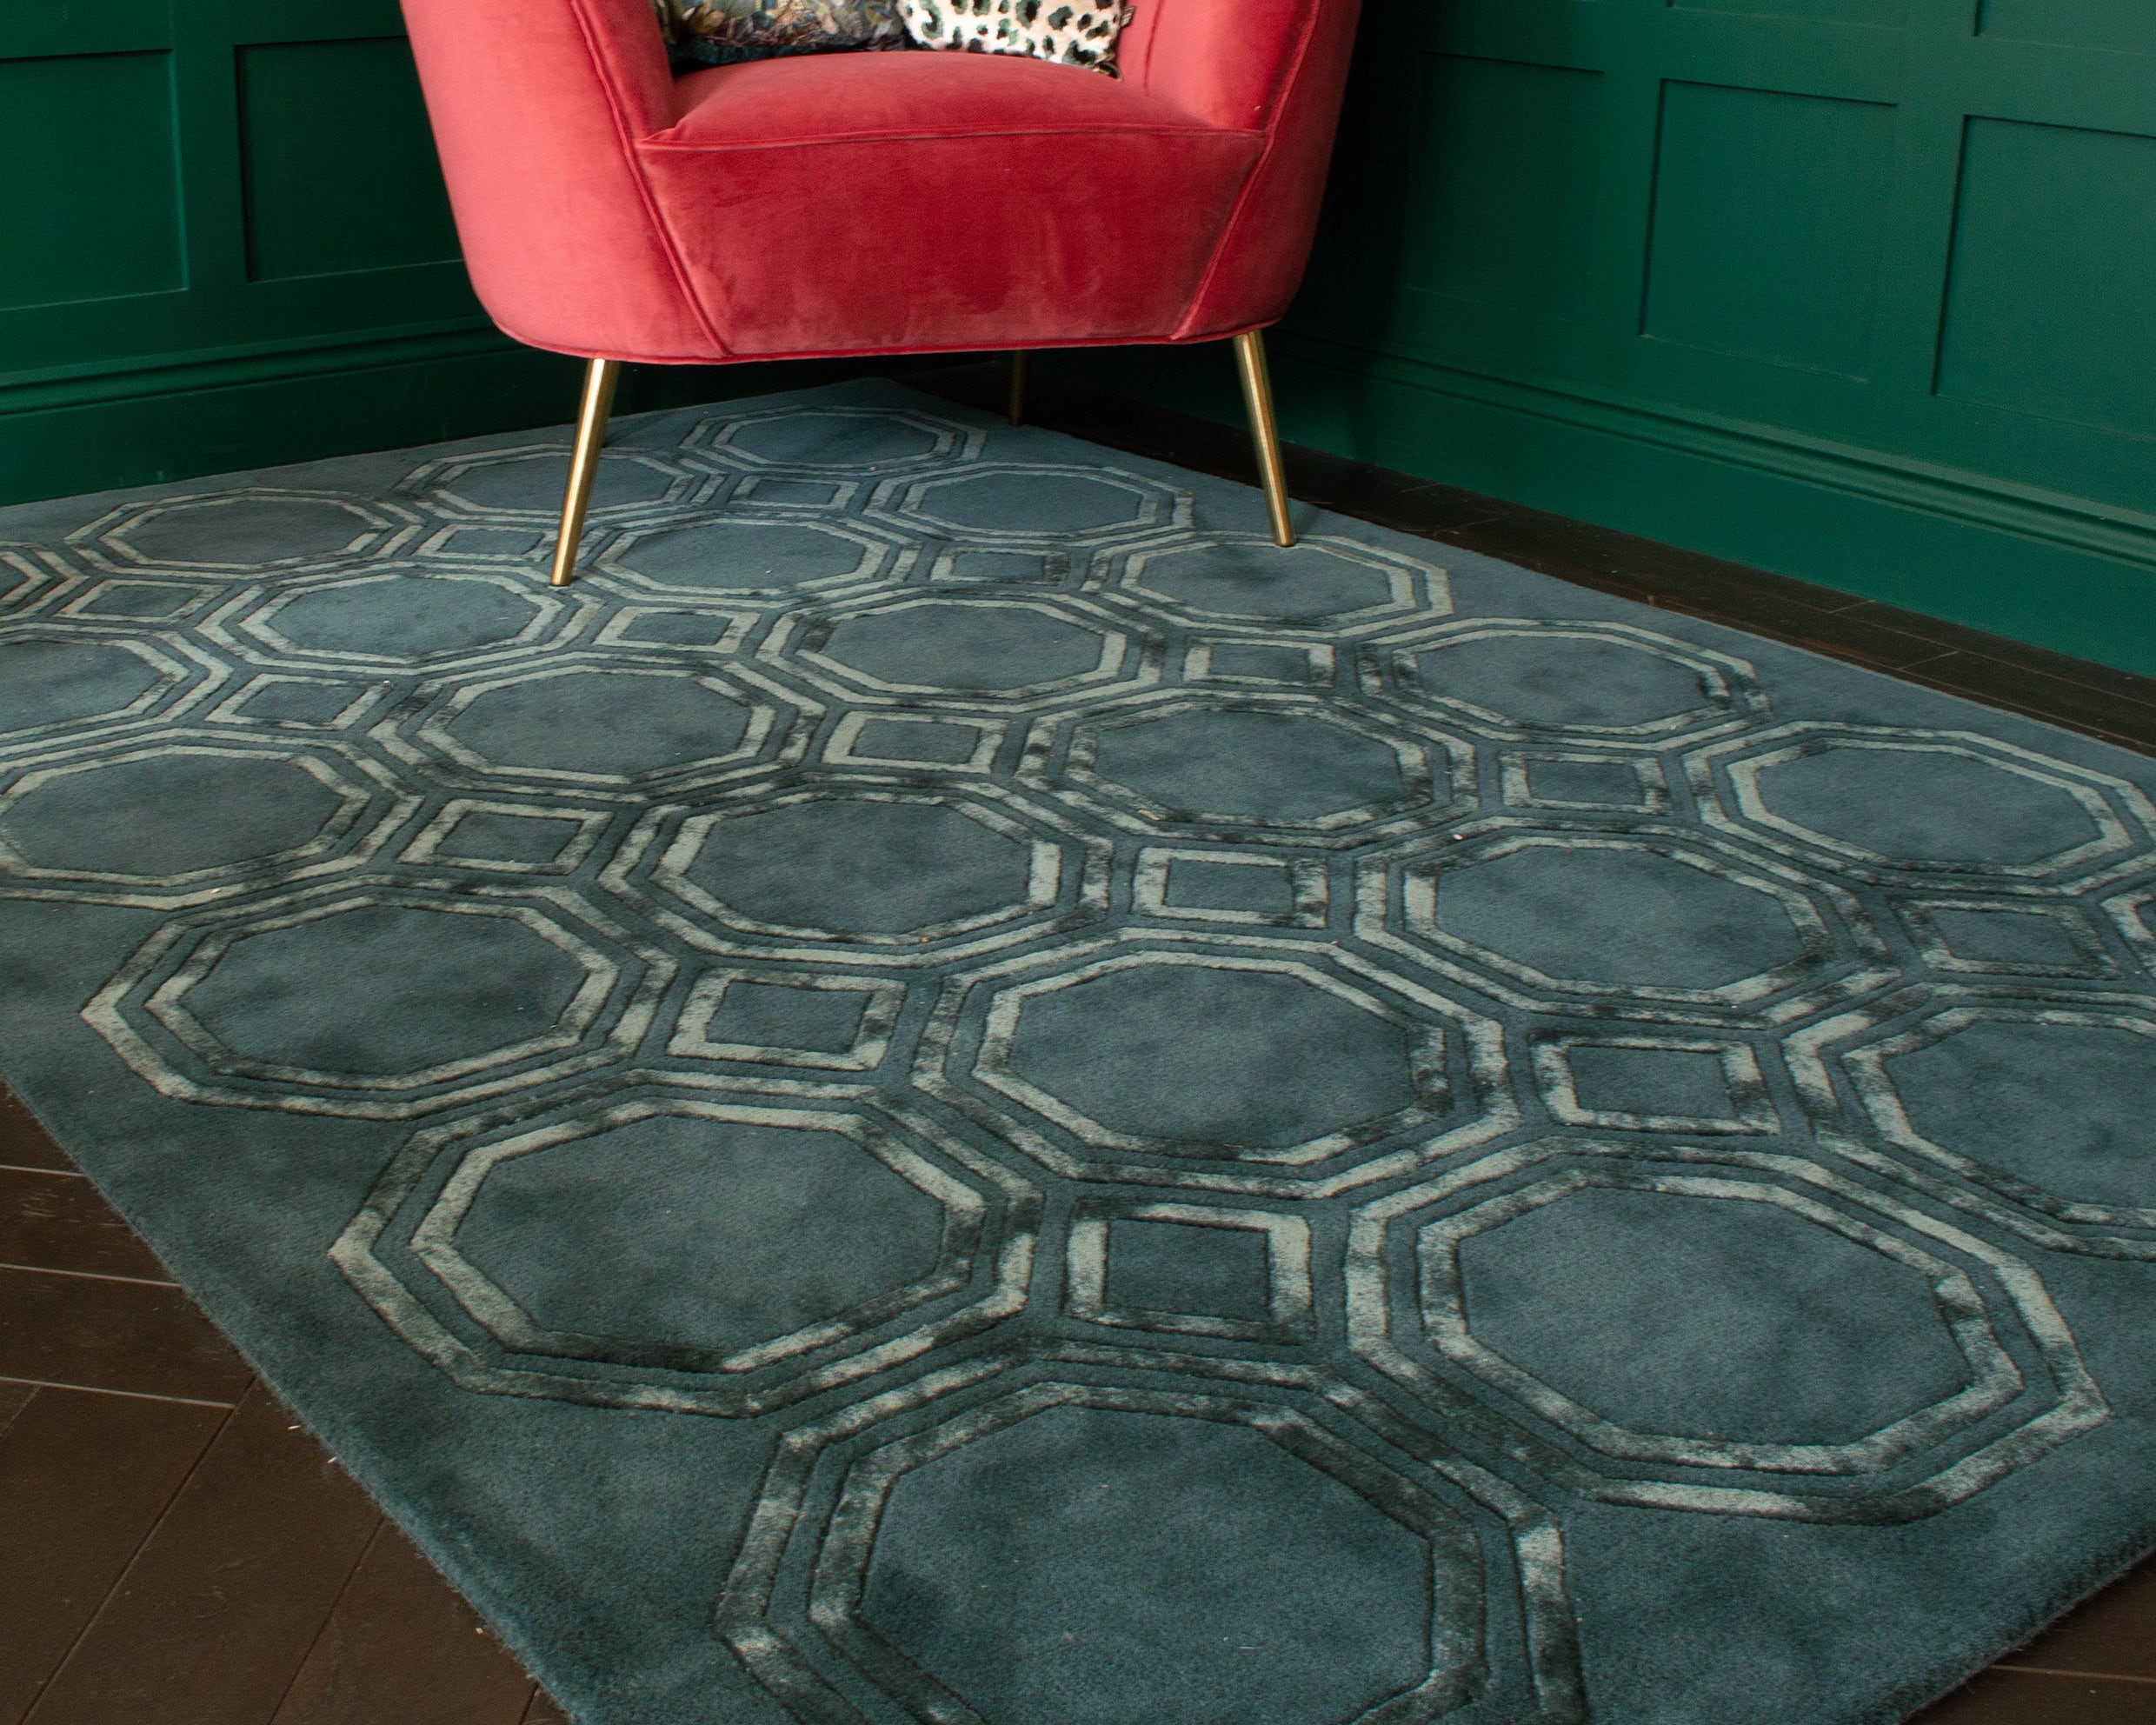 A teal-colored rug with a geometric pattern on a dark wood floor